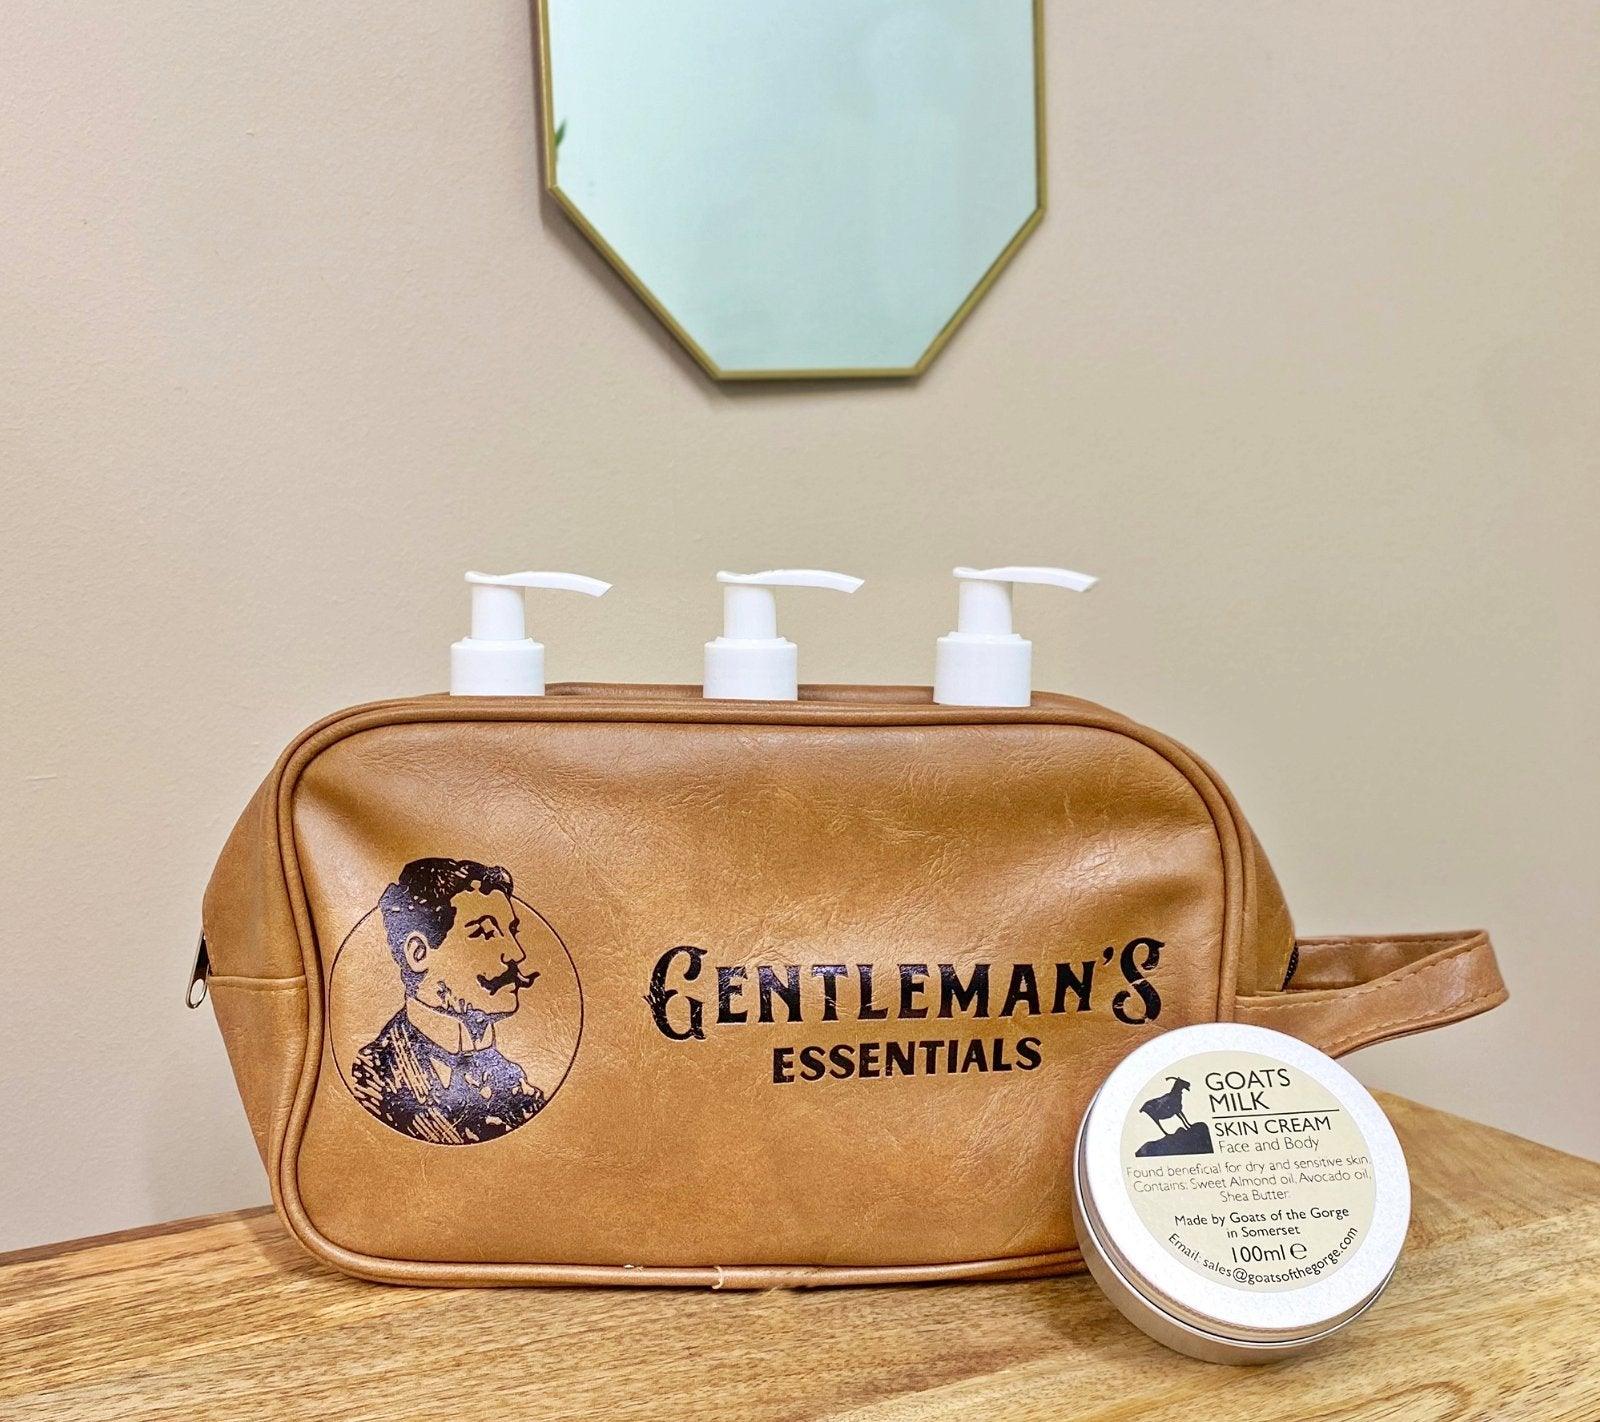 View Gentlemans Toiletry Bag with Carrying Loop information